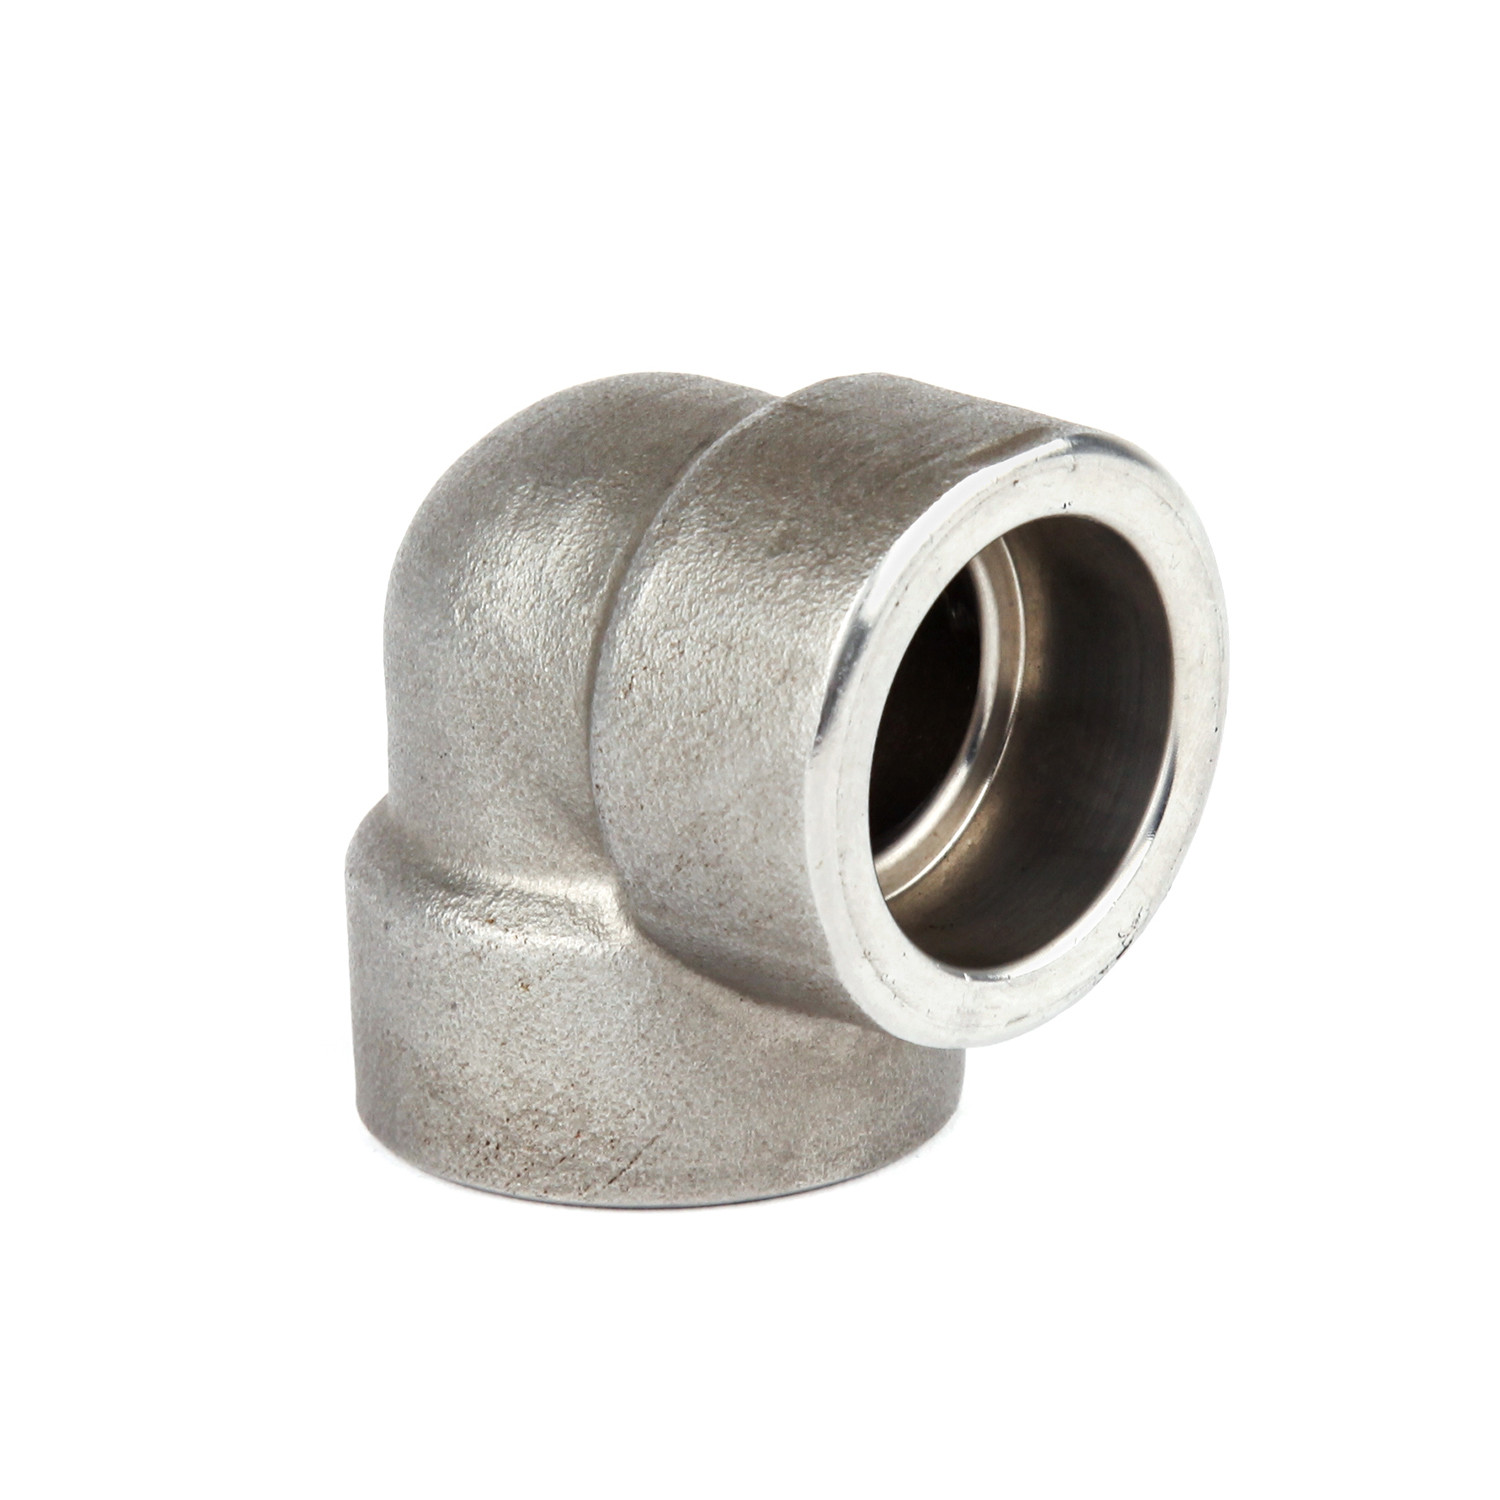 Wholesale Forged Socket Weld Stainless Steel Pipe Fittings ANSI B16.5 Standard from china suppliers